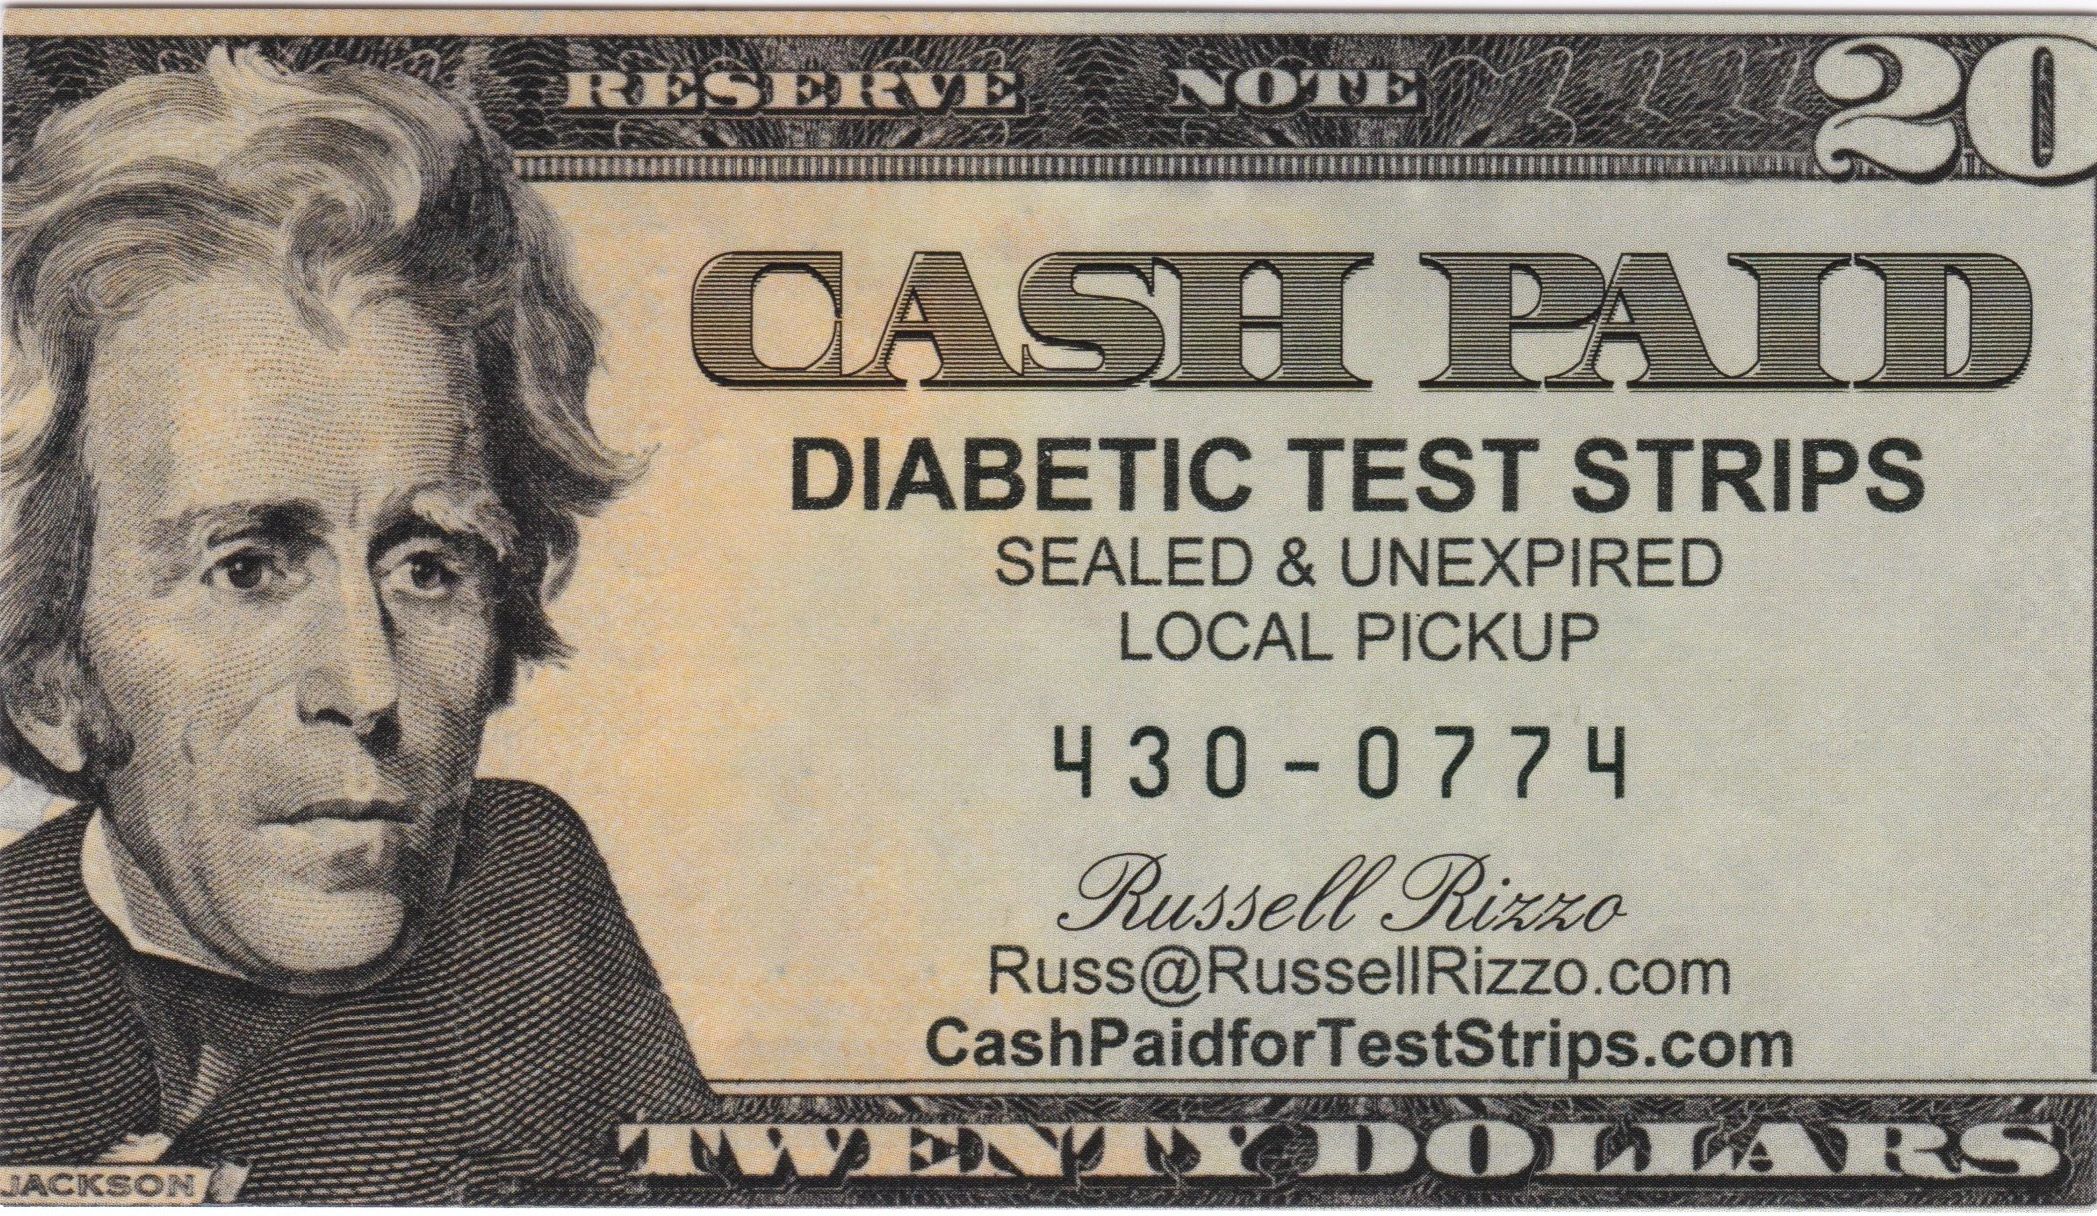 Cash paid for diabetic test strips
